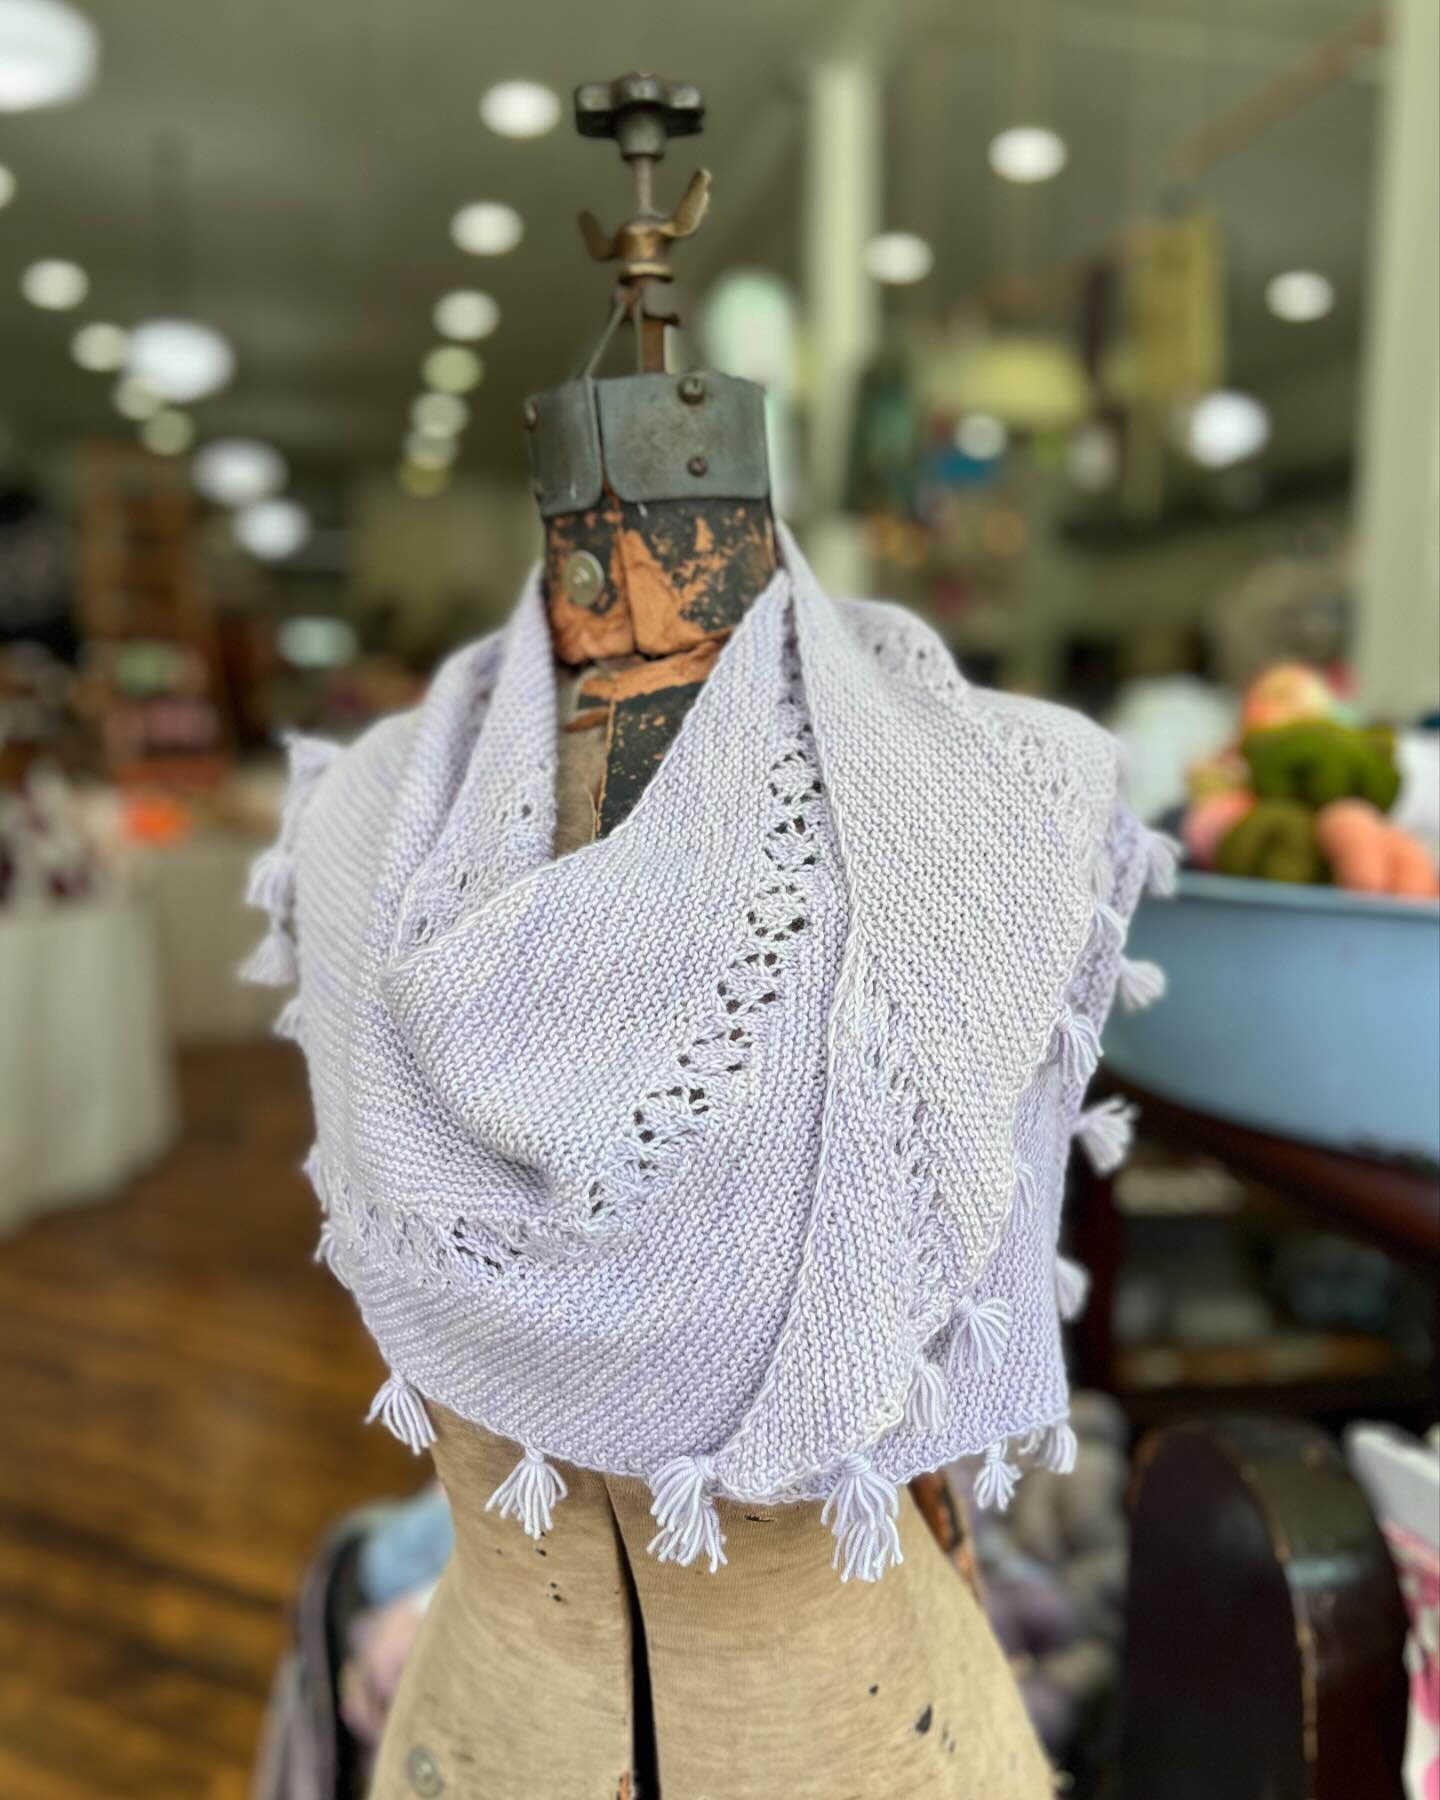 Alyssa knit our newest sample - the #amrenshawl by @jojilocat! It is a wonderful asymmetric light-as-a-feather shawlette, and the perfect one skein project!

Take a peek next time you are in!

Our shop hours:
Monday-Thursday: 9:30am-8pm
Friday-Saturd